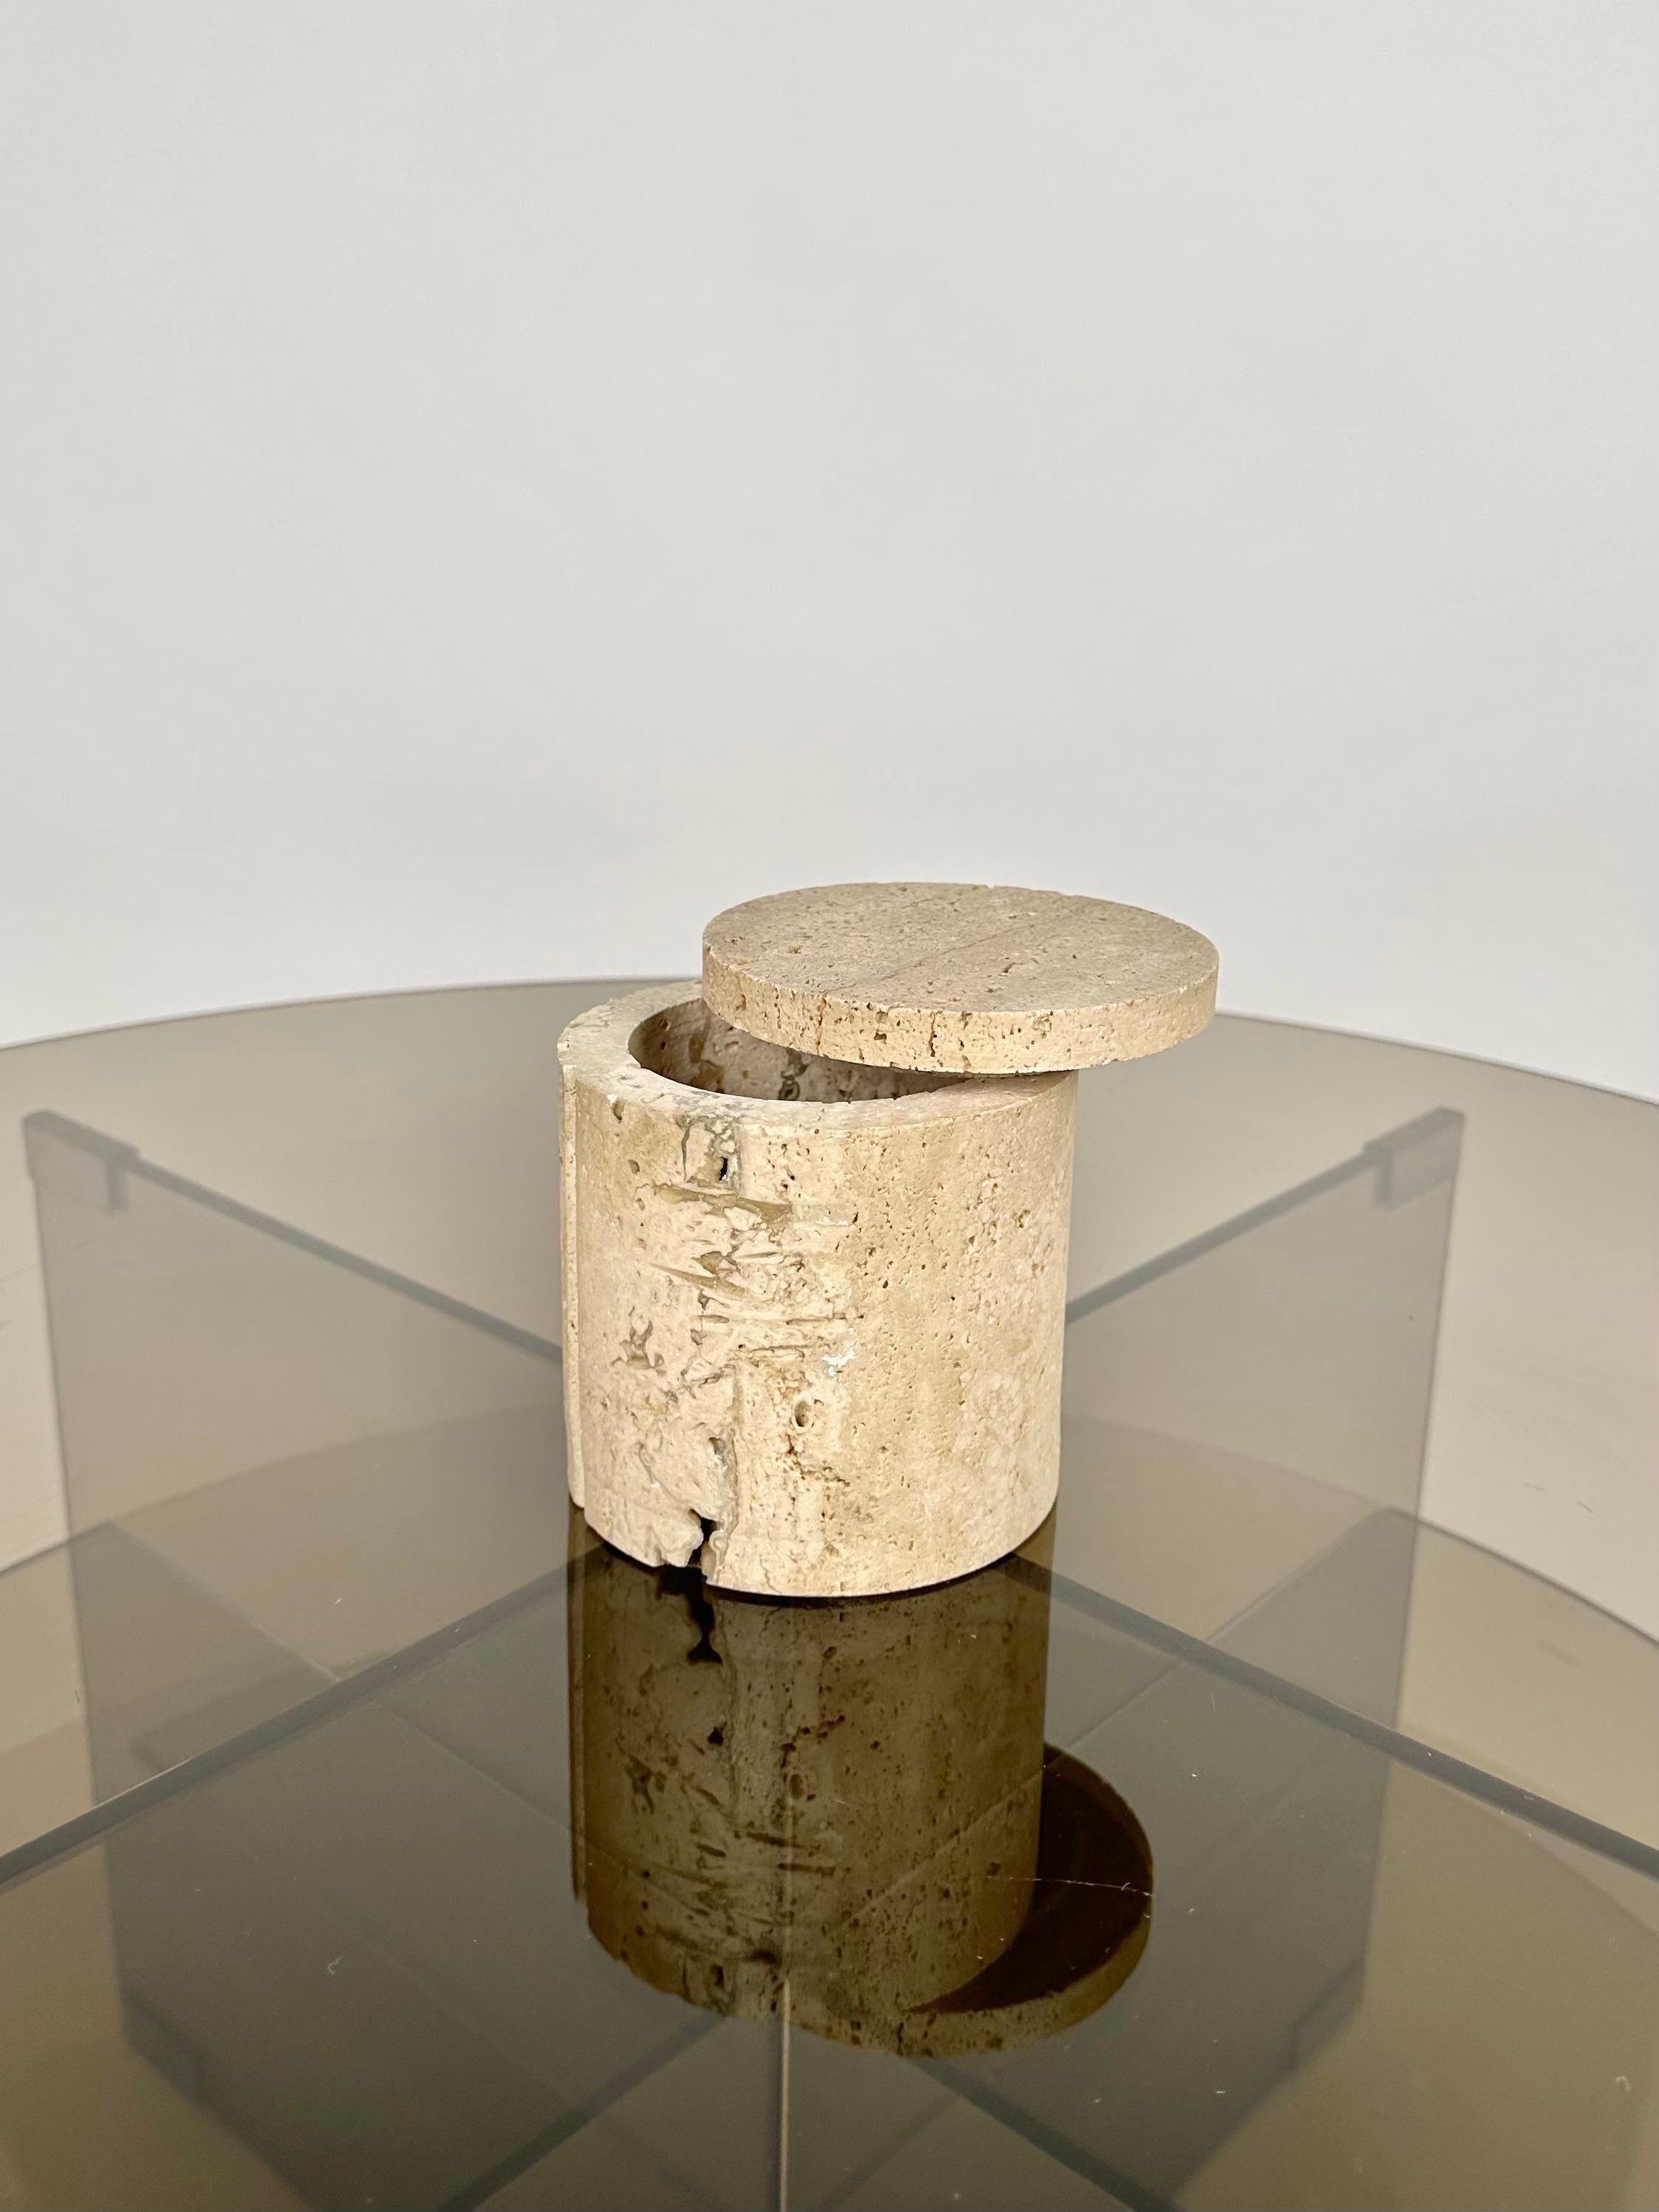 Midcentury Decorative Box in Travertine by Fratelli Mannelli, Italy, 1970s For Sale 1